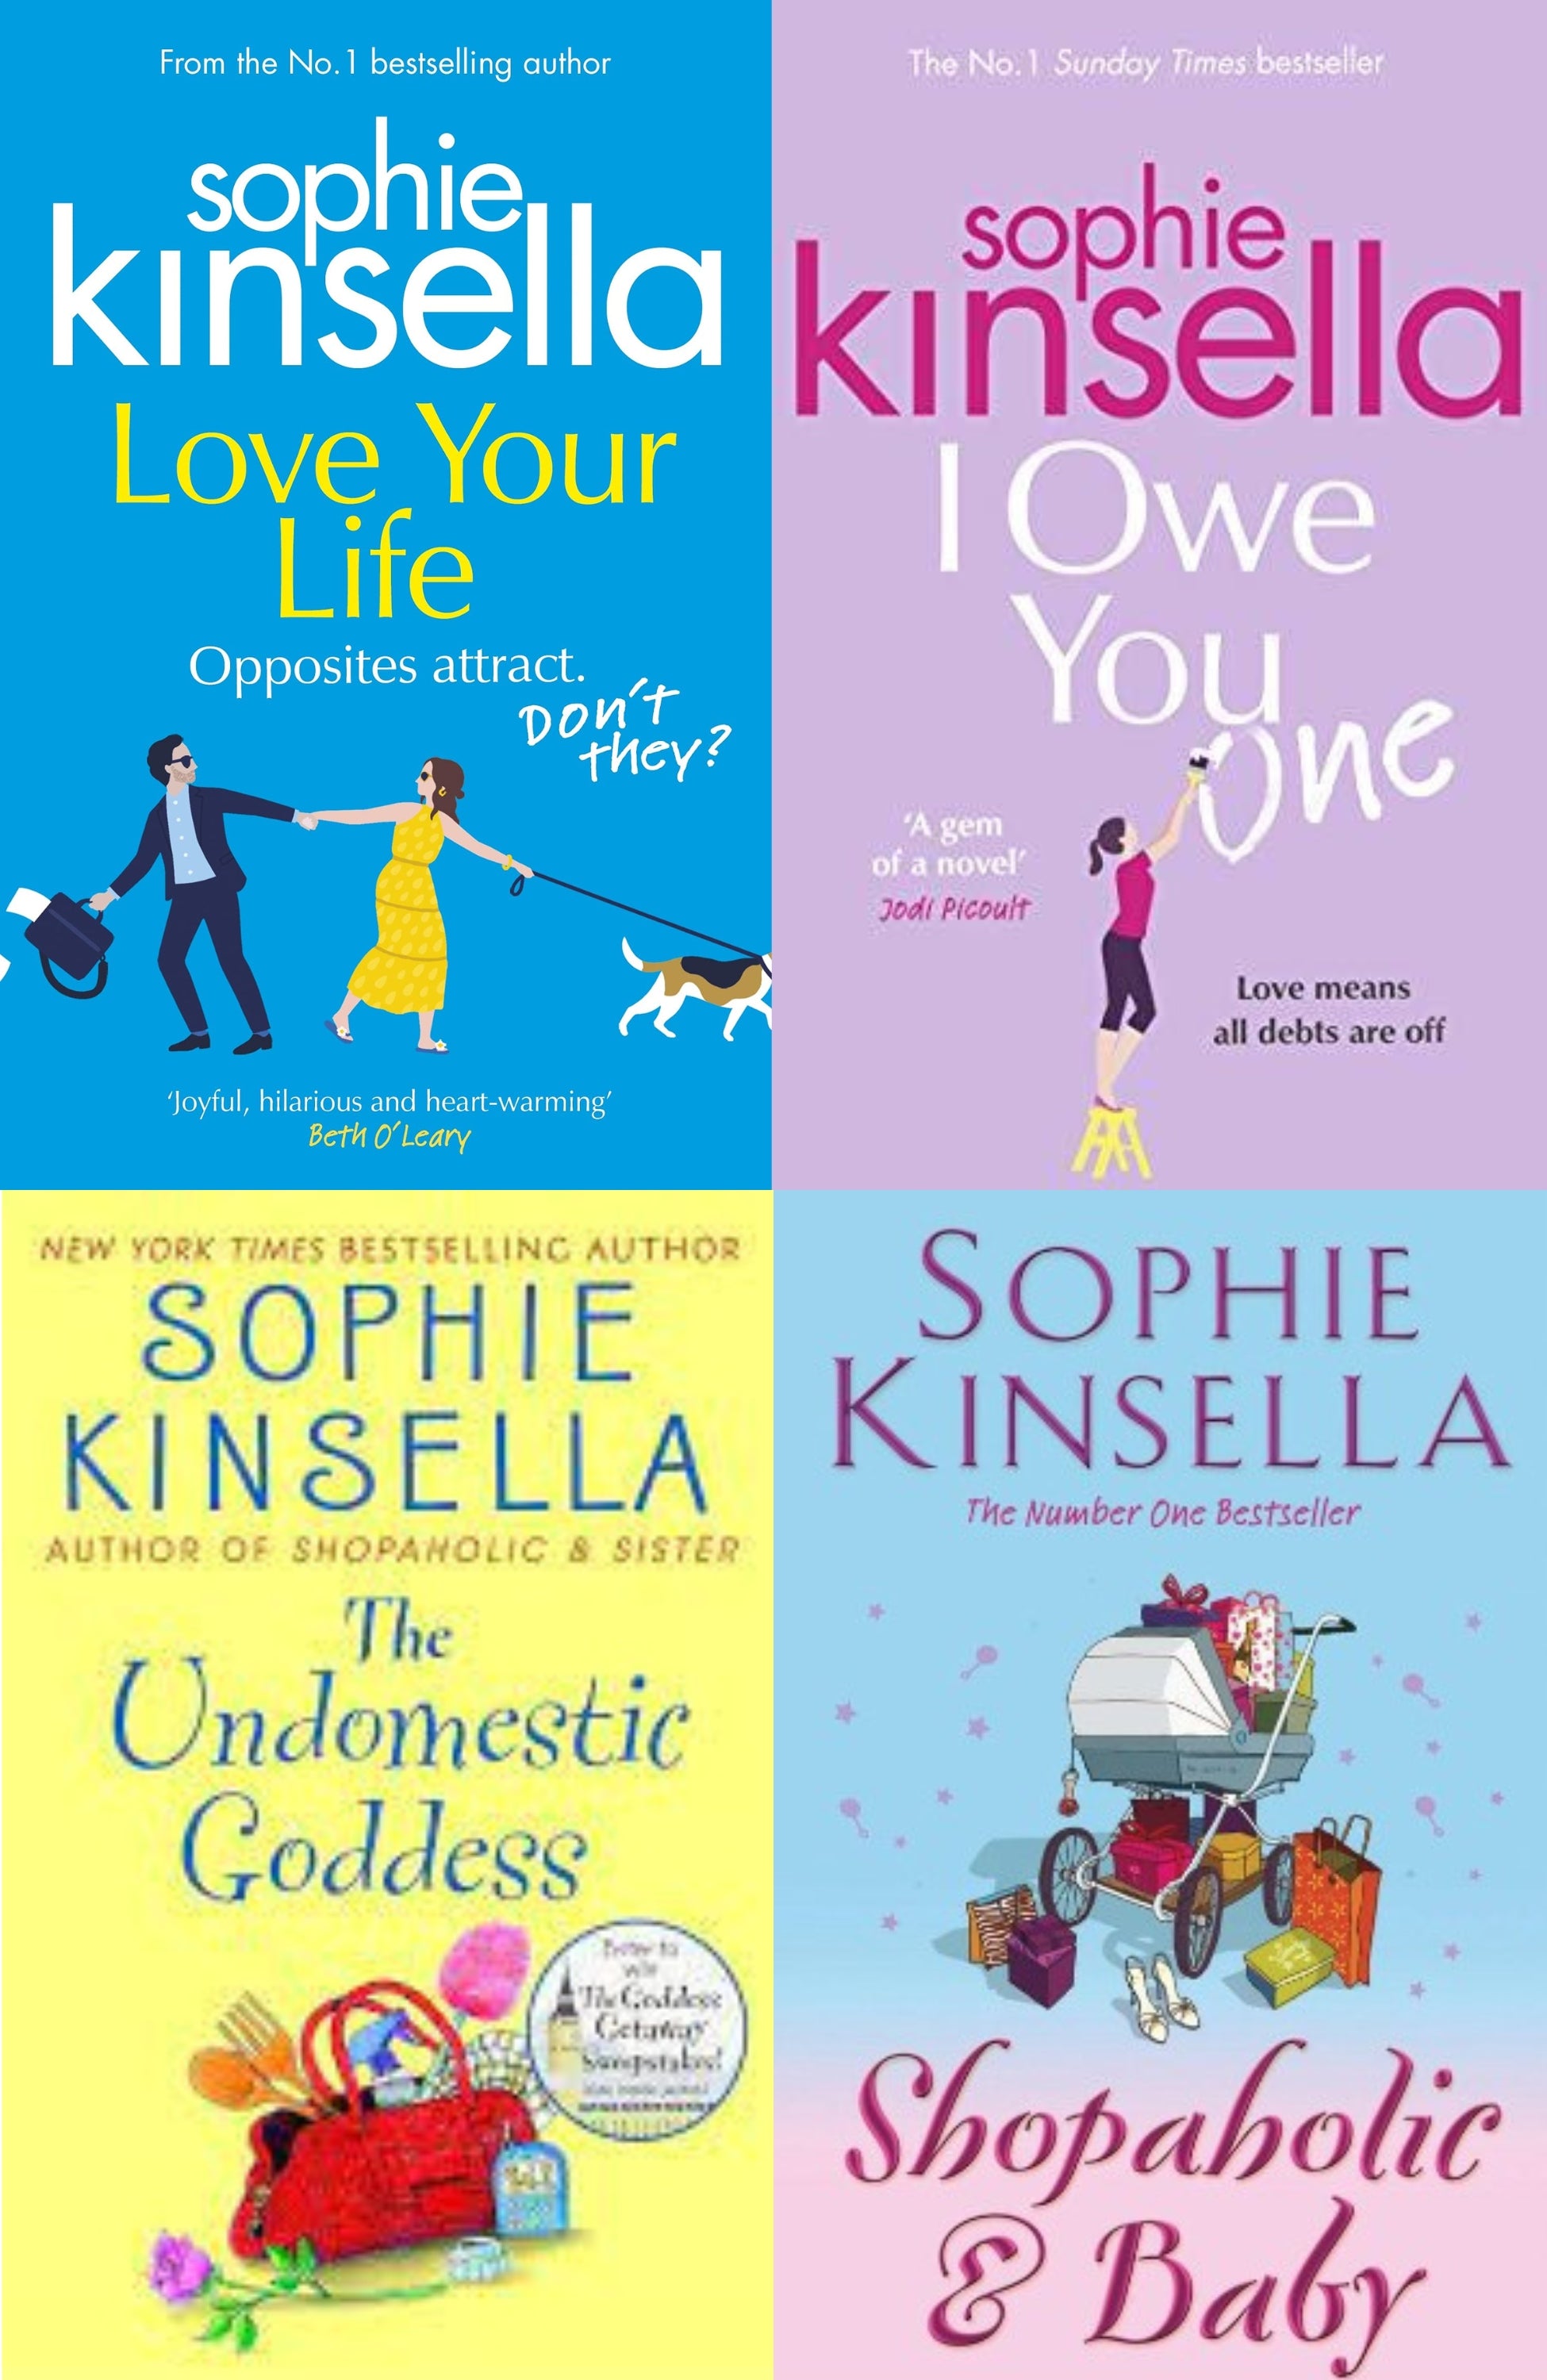 Sophie Kinsella Bestseller Book Combo ( The Undomestic Goddess, I Owe You One, Love Your Life, Shopaholic and Baby )